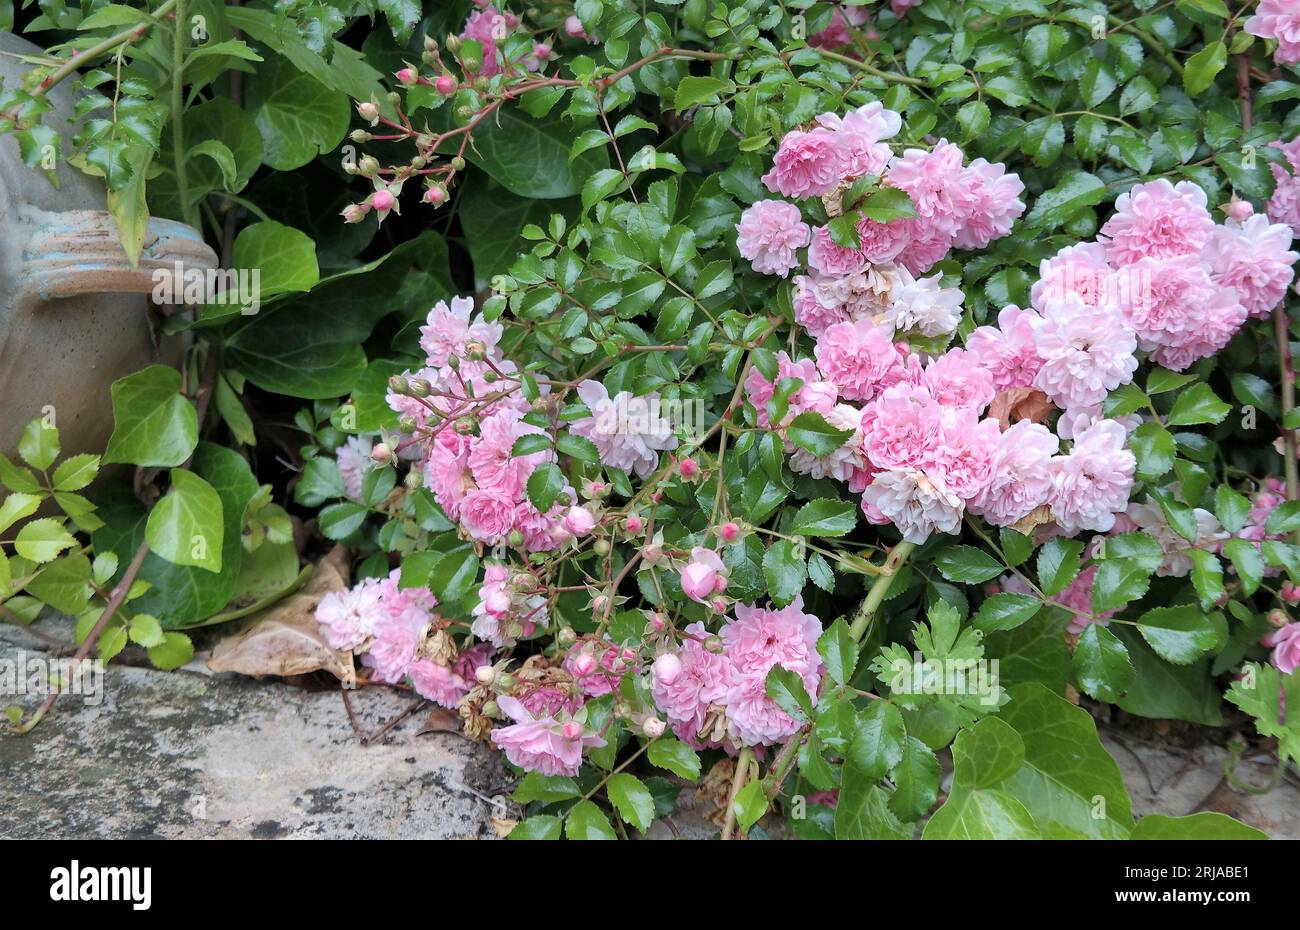 A bright standard Rose with numerous small pumpkin flowers. A decorative pink perpetually flowering bush, and in a green rural garden. Stock Photo